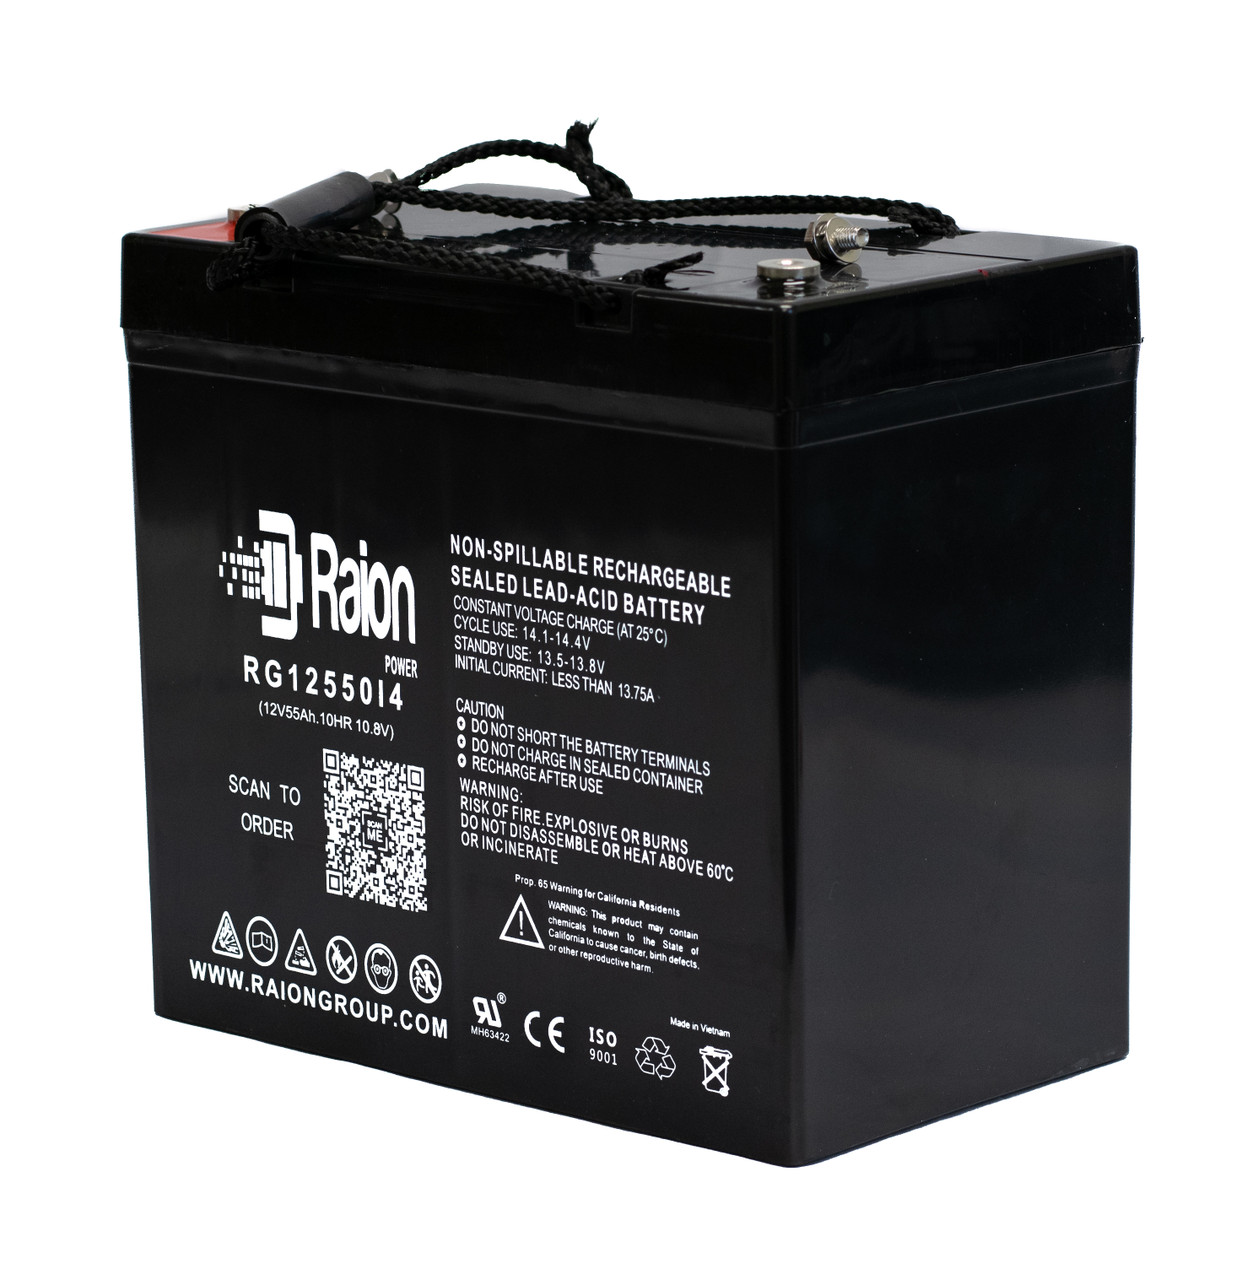 Raion Power 12V 55Ah 22NF Mobility Scooter Battery Replacement for Golden Technology Compass HD GP620 SS